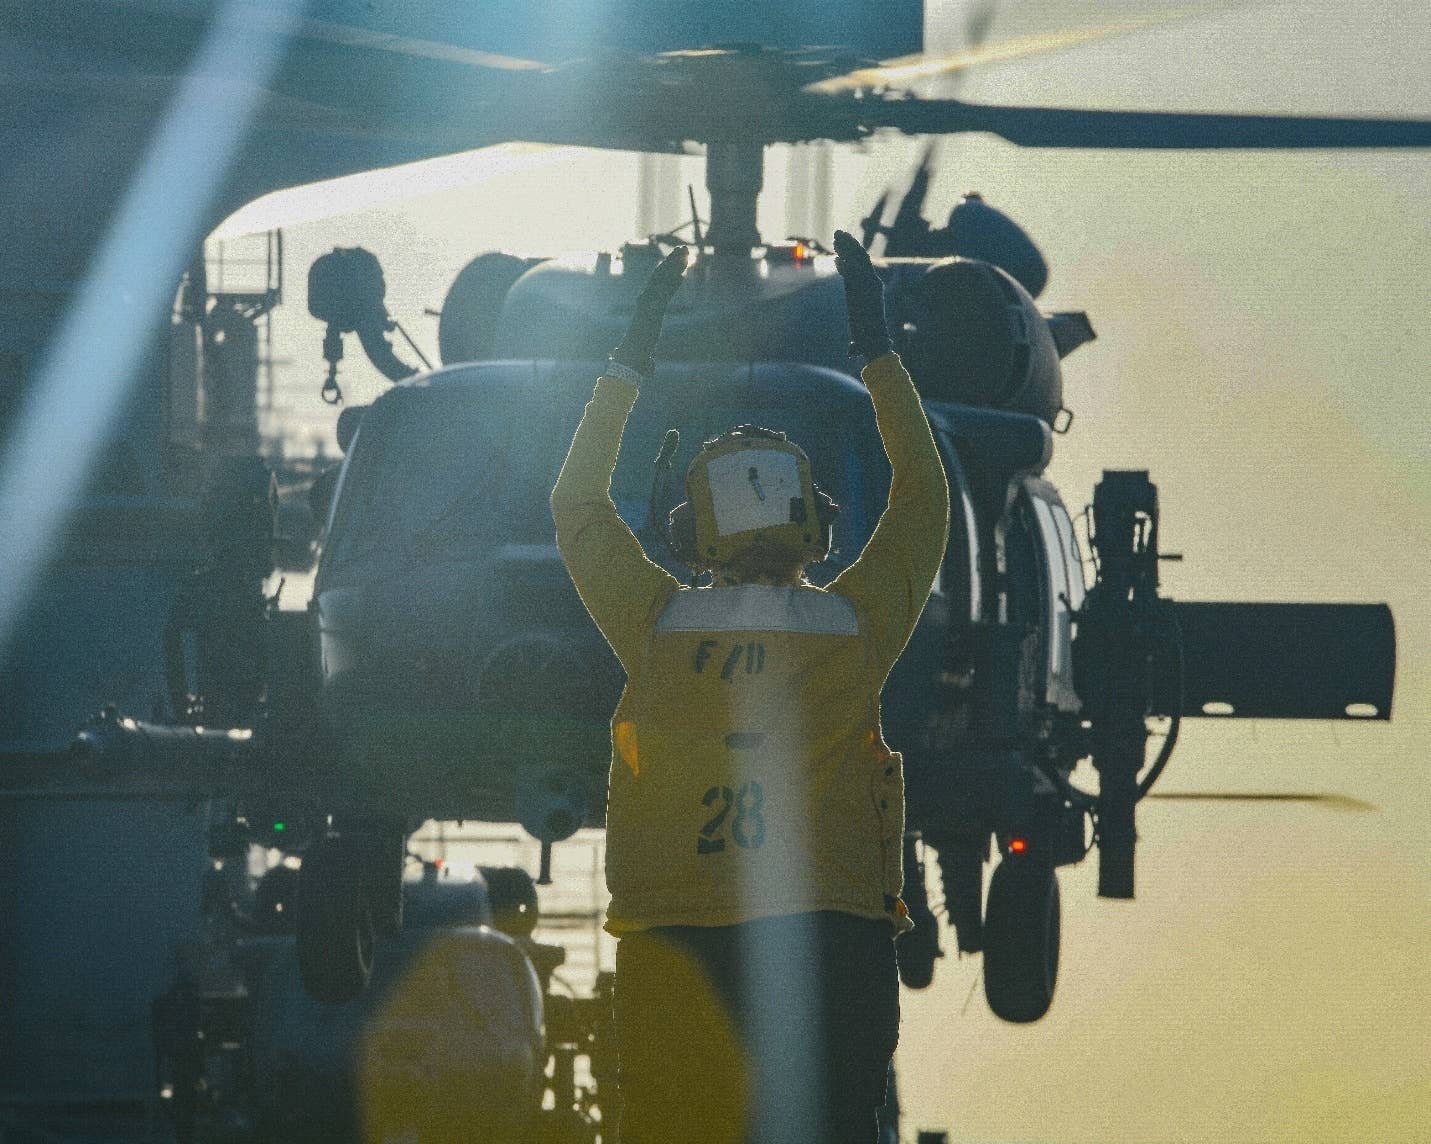 Aviation Boatswain's Mate (Handling) 3rd Class Alexis Woods directs an HH-60W helicopter from Moody Air Force Base as it departs the flight deck of USS <em>Hershel Williams</em>, Dec. 31, 2022. <em>Credit: U.S. Navy photo by Mass Communication Specialist 2nd Class Conner D. Blake/Released</em>